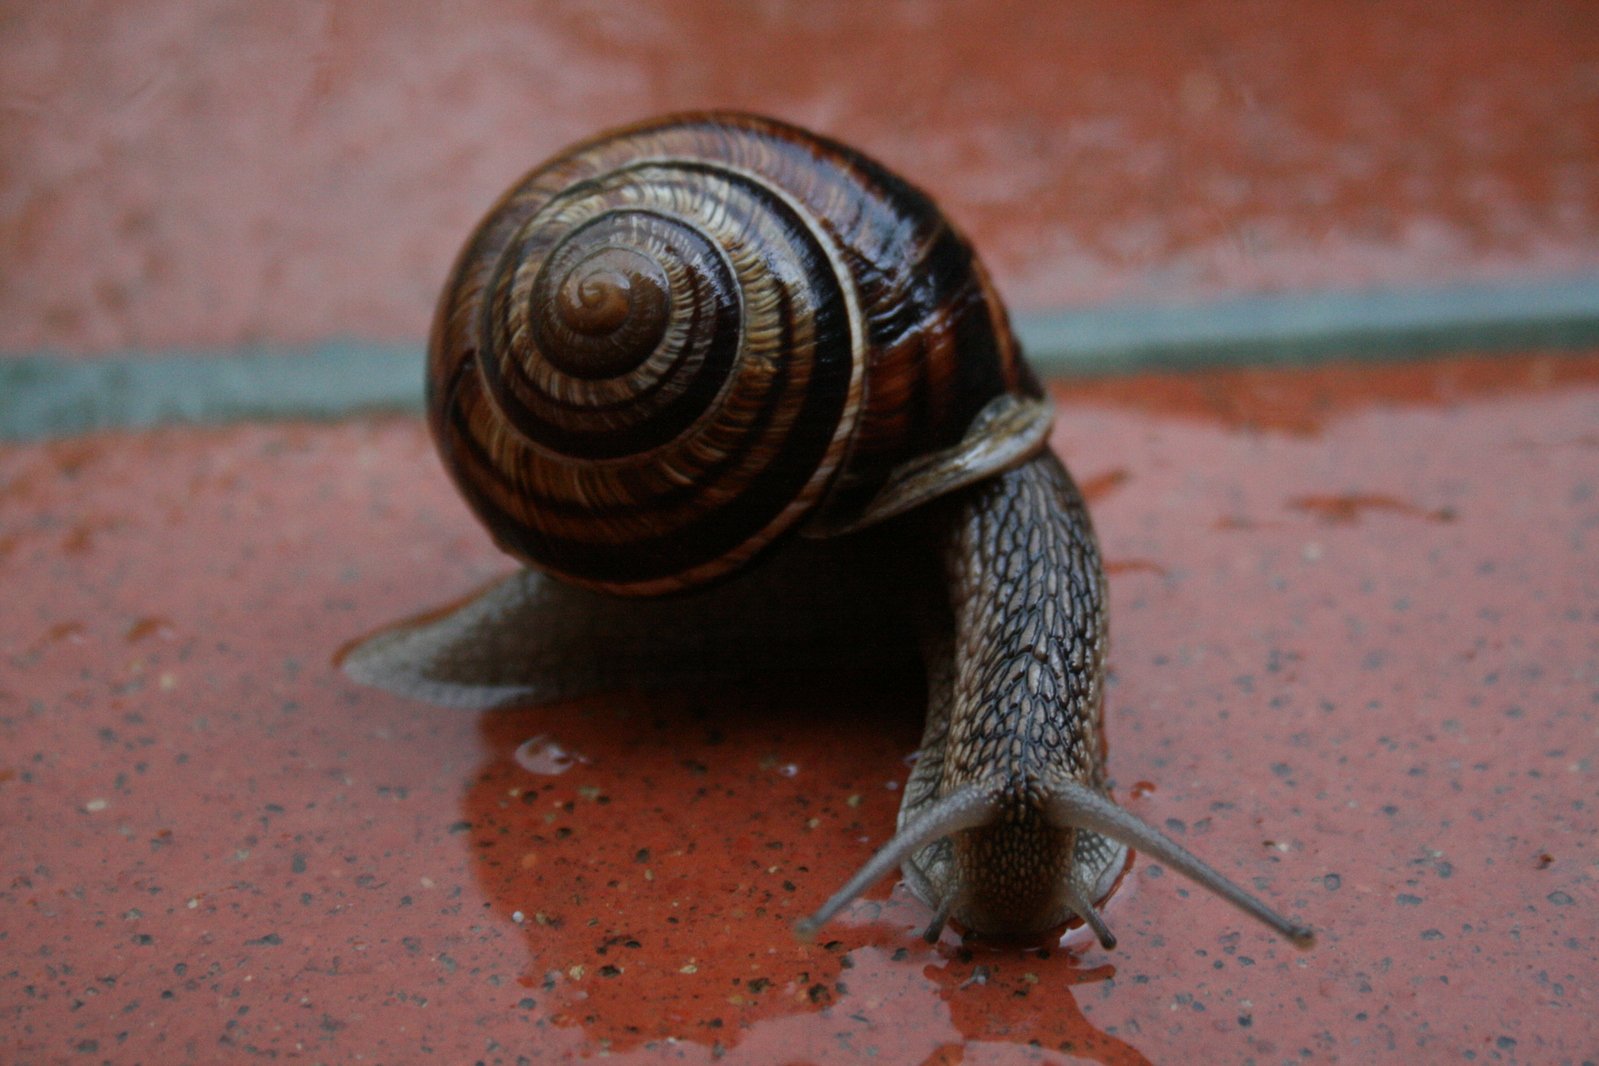 a close up of a snail on a red surface